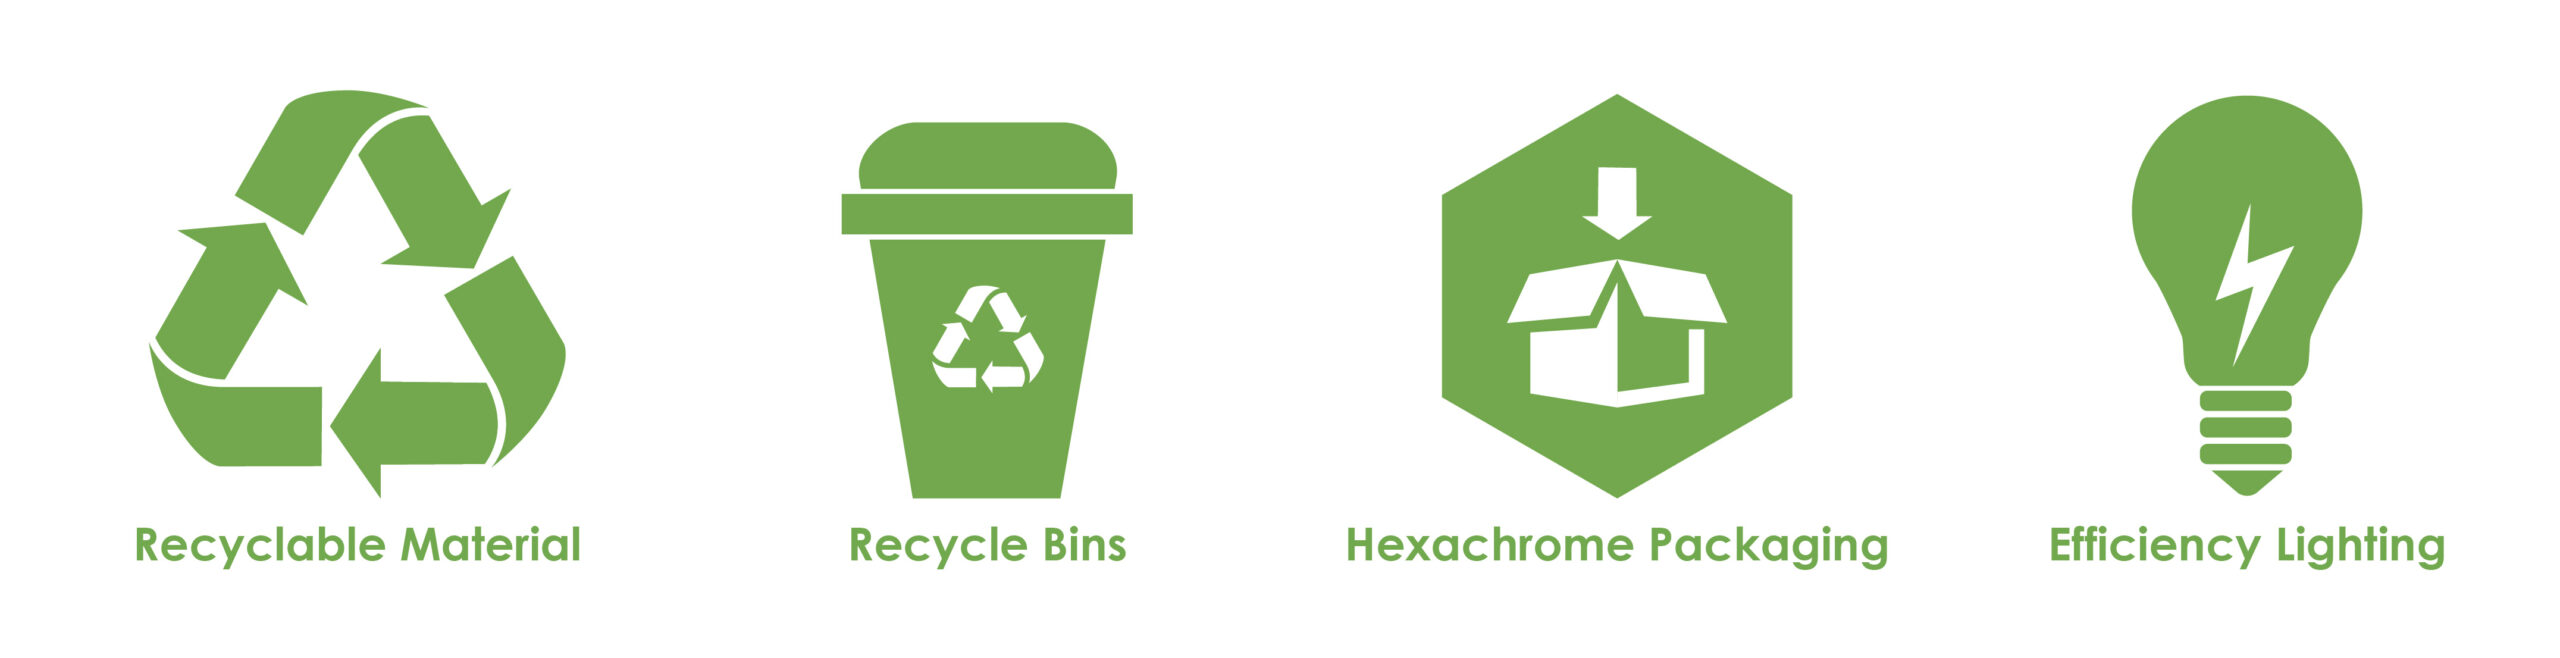 Sustainability icons, recycle, hexachrome packaging, recycle bins, efficiency lighting